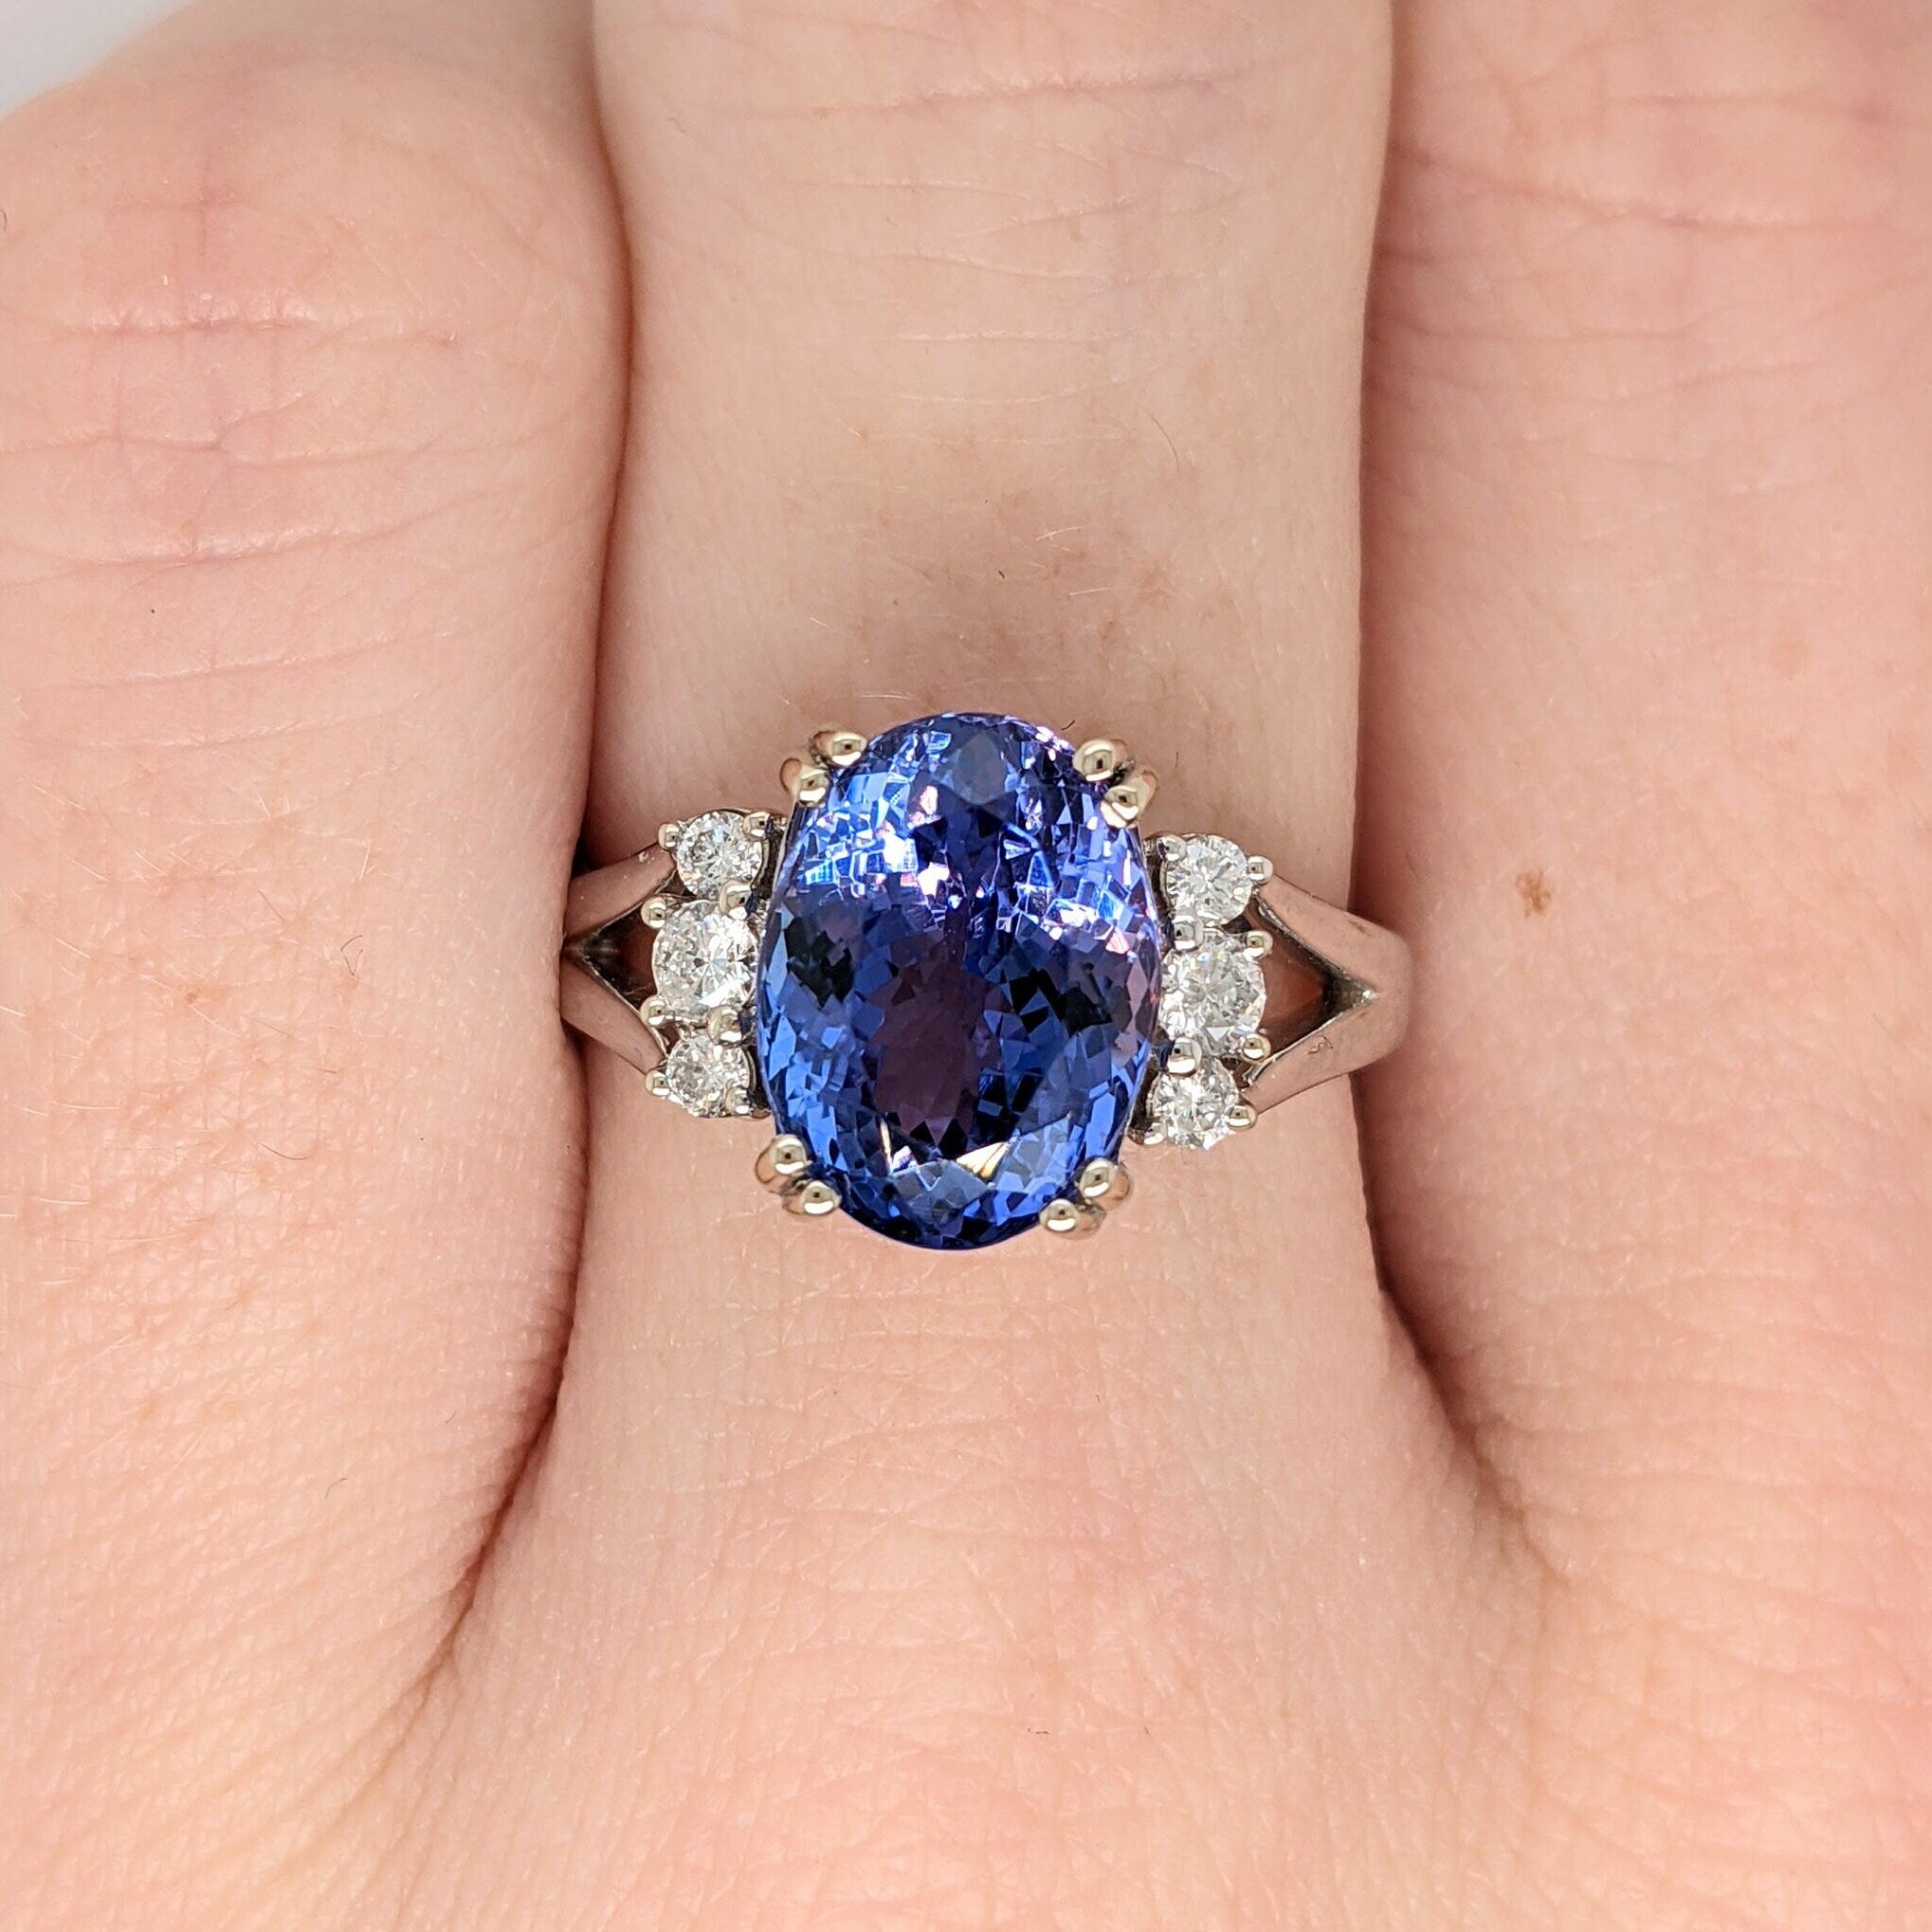 Deep Blue Tanzanite Ring in 14K Solid White Gold w Natural diamond Accents | Oval 10x8mm | December Birthstone Ring | Statement Ring